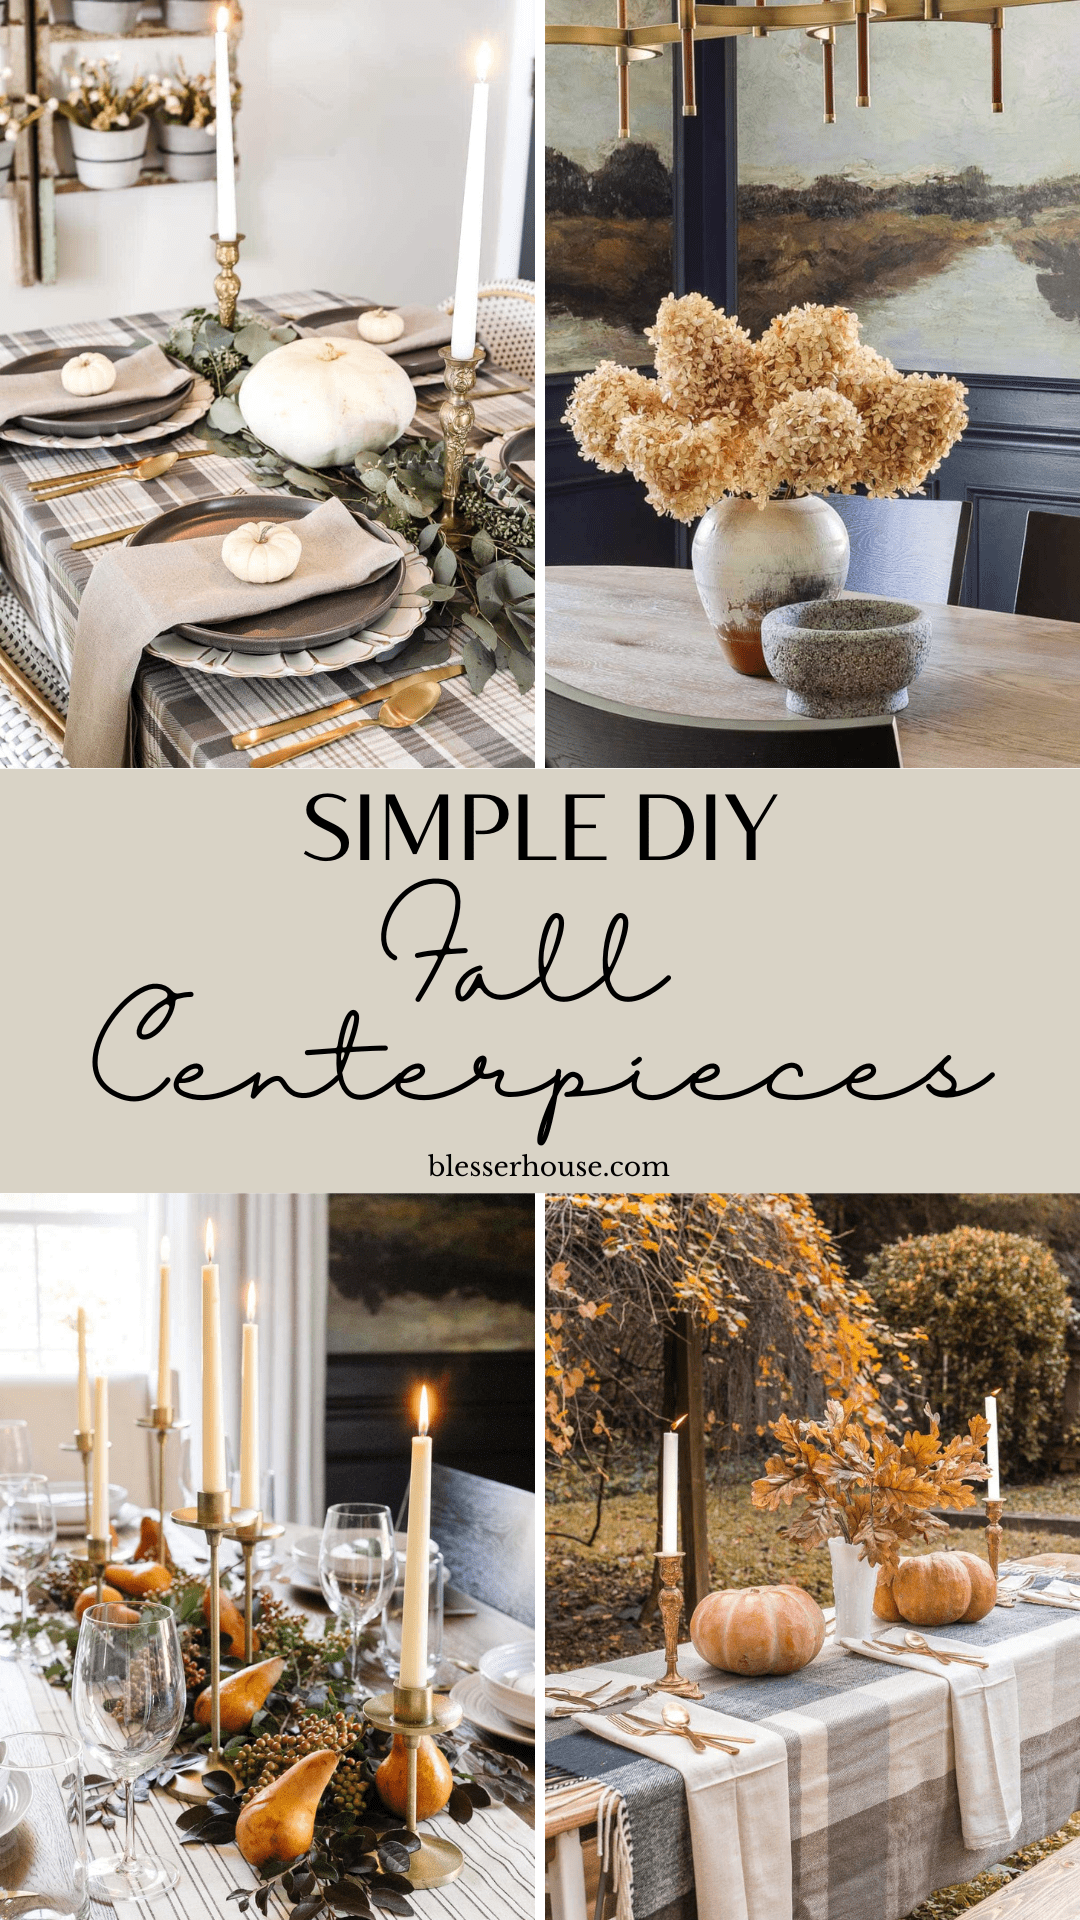 13 DIY fall centerpiece ideas that you can make in 5 minutes or less as welcoming fall table decor in a rush for any gathering.